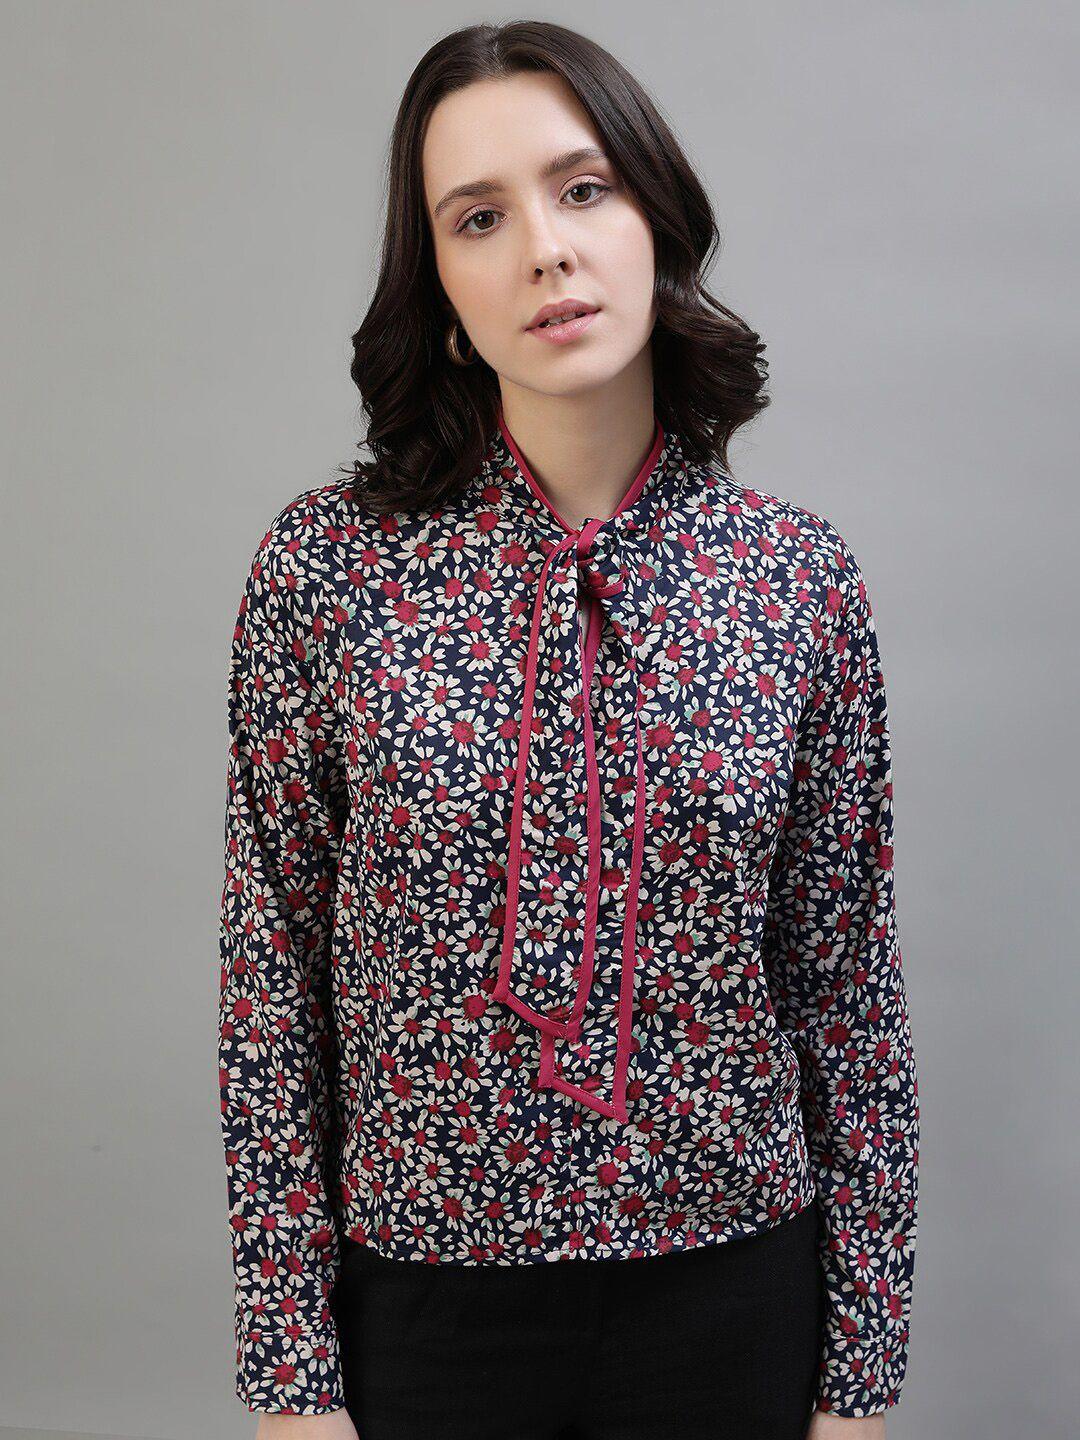 iconic floral printed tie-up neck shirt style top